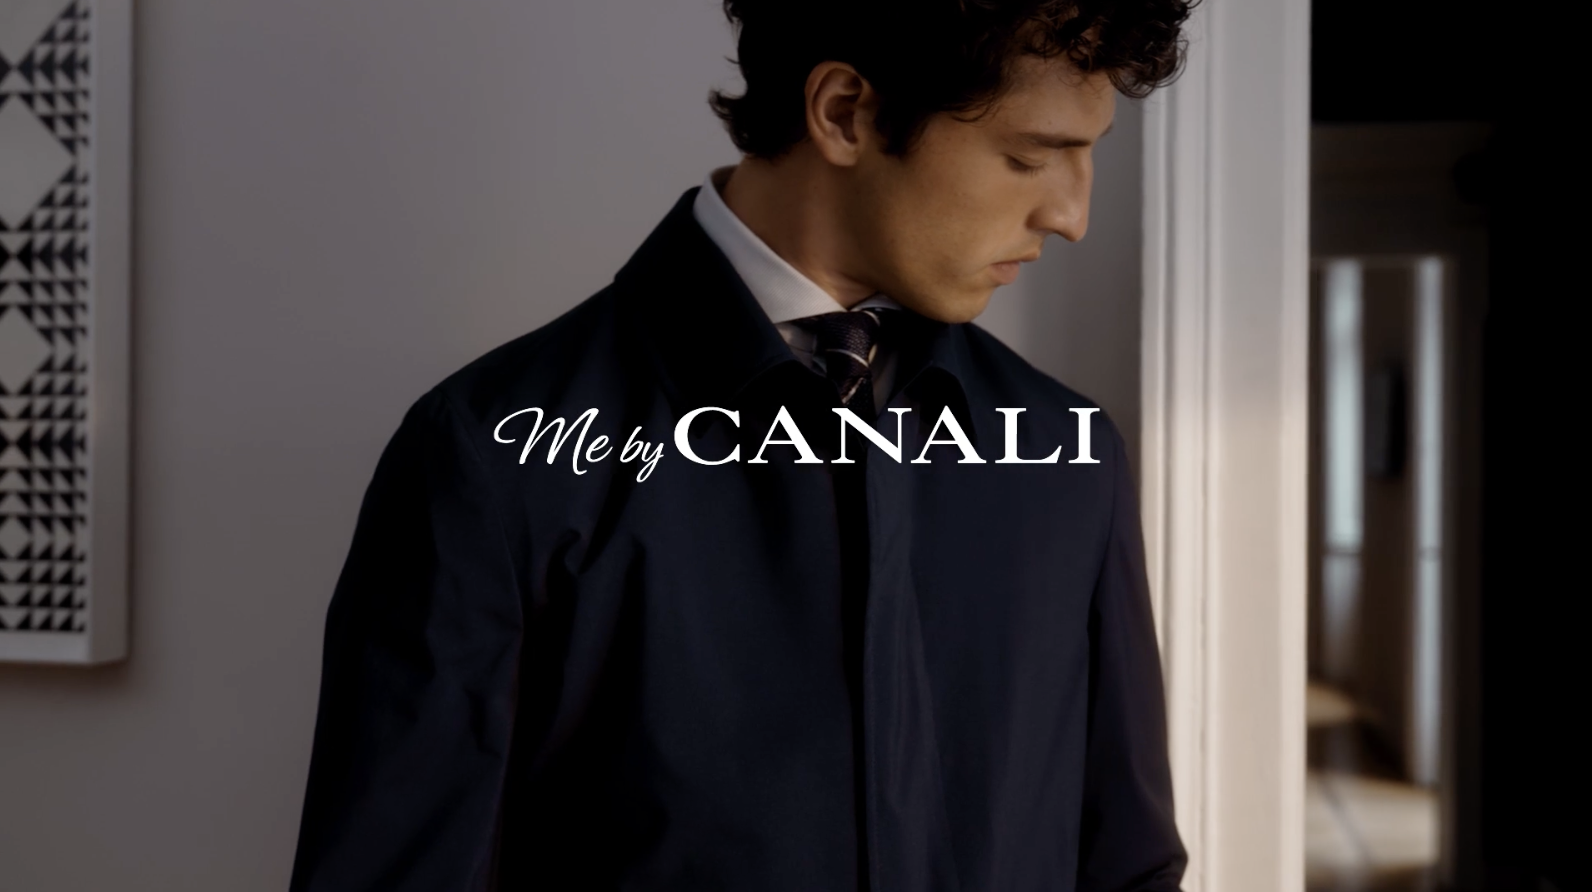 Canali Turnover Surged 49% and Will Continue to Invest in the China Market